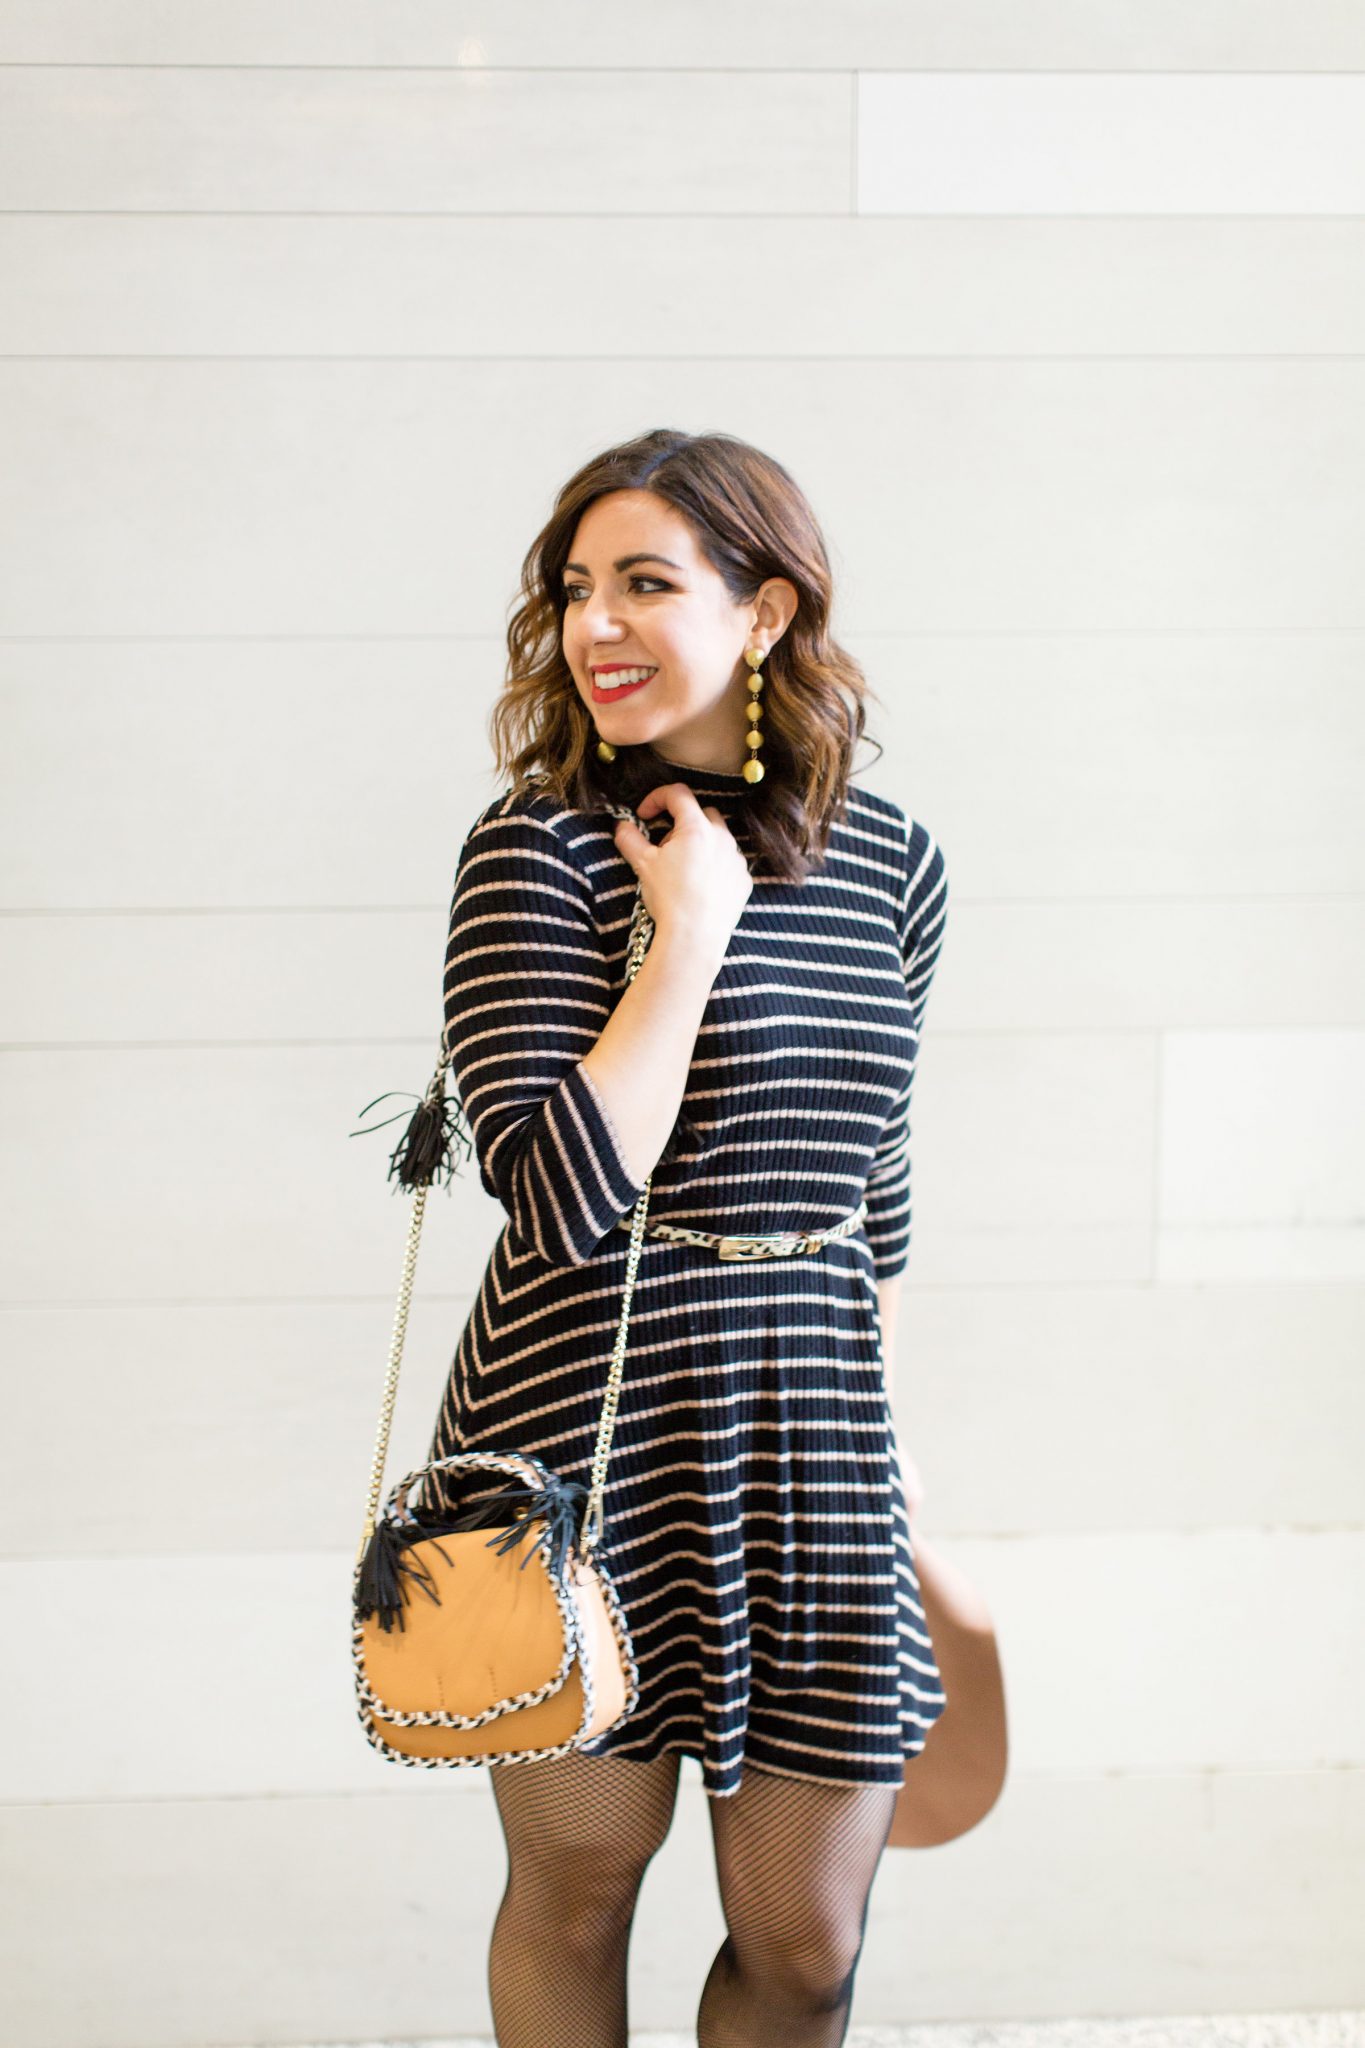 Lifestyle blogger Roxanne of Glass of Glam wearing a striped dress, Rebecca Minkoff bag, ted slouch booties, and fishnet tights